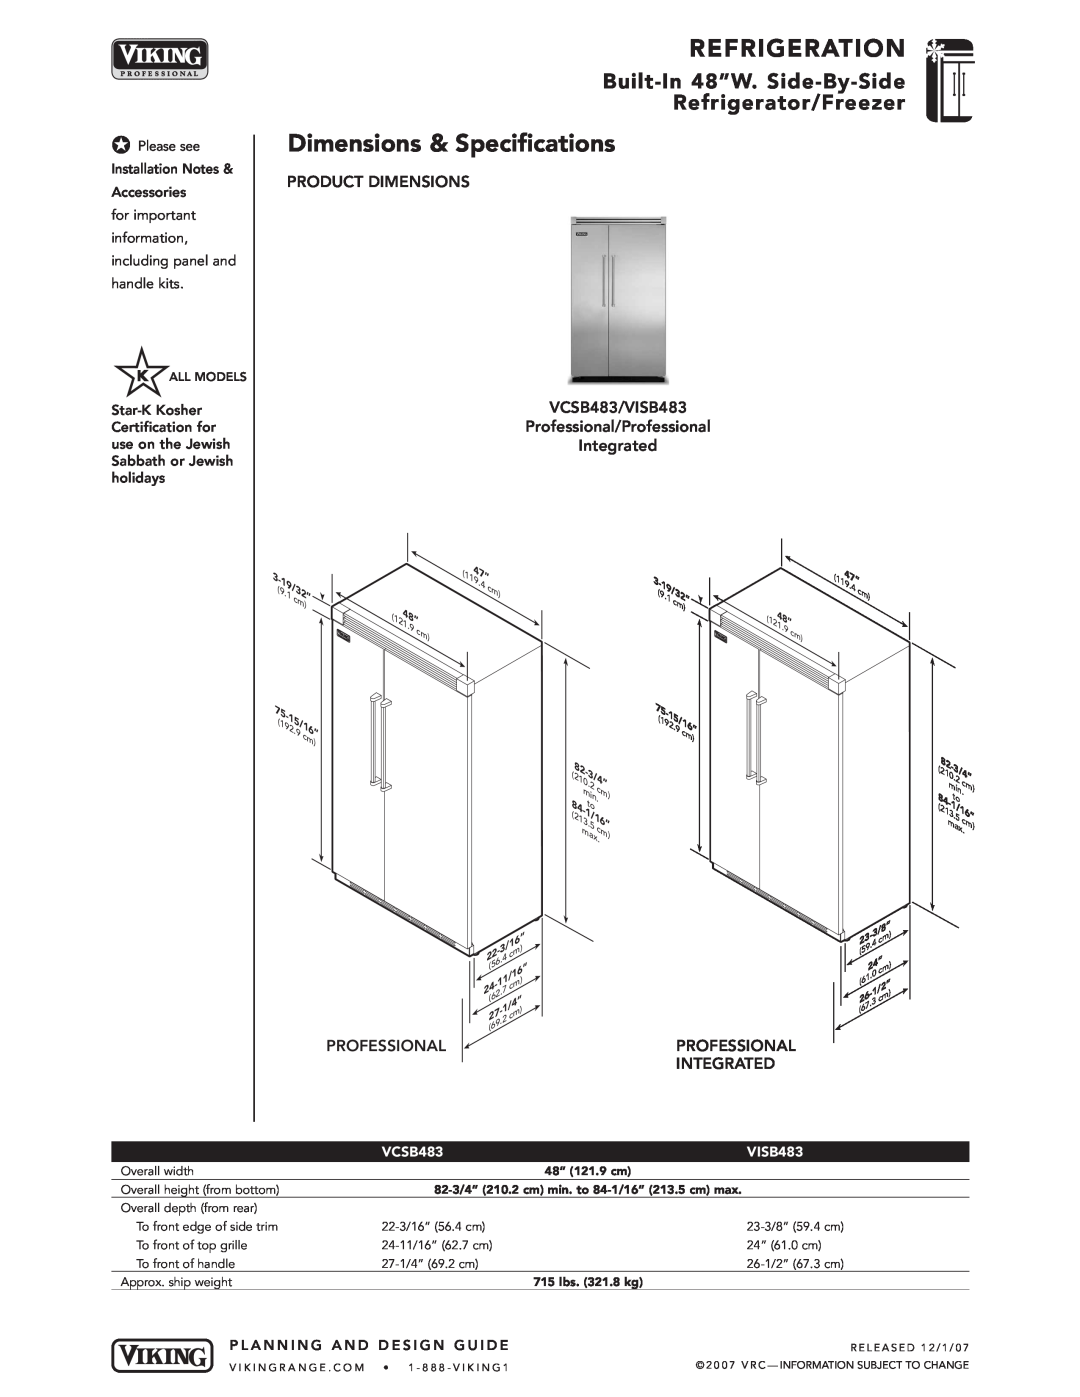 Viking Dimensions & Specifications, PRODUCT DIMENSIONS VCSB483/VISB483 Professional/Professional, Refrigeration, 2.15/1 